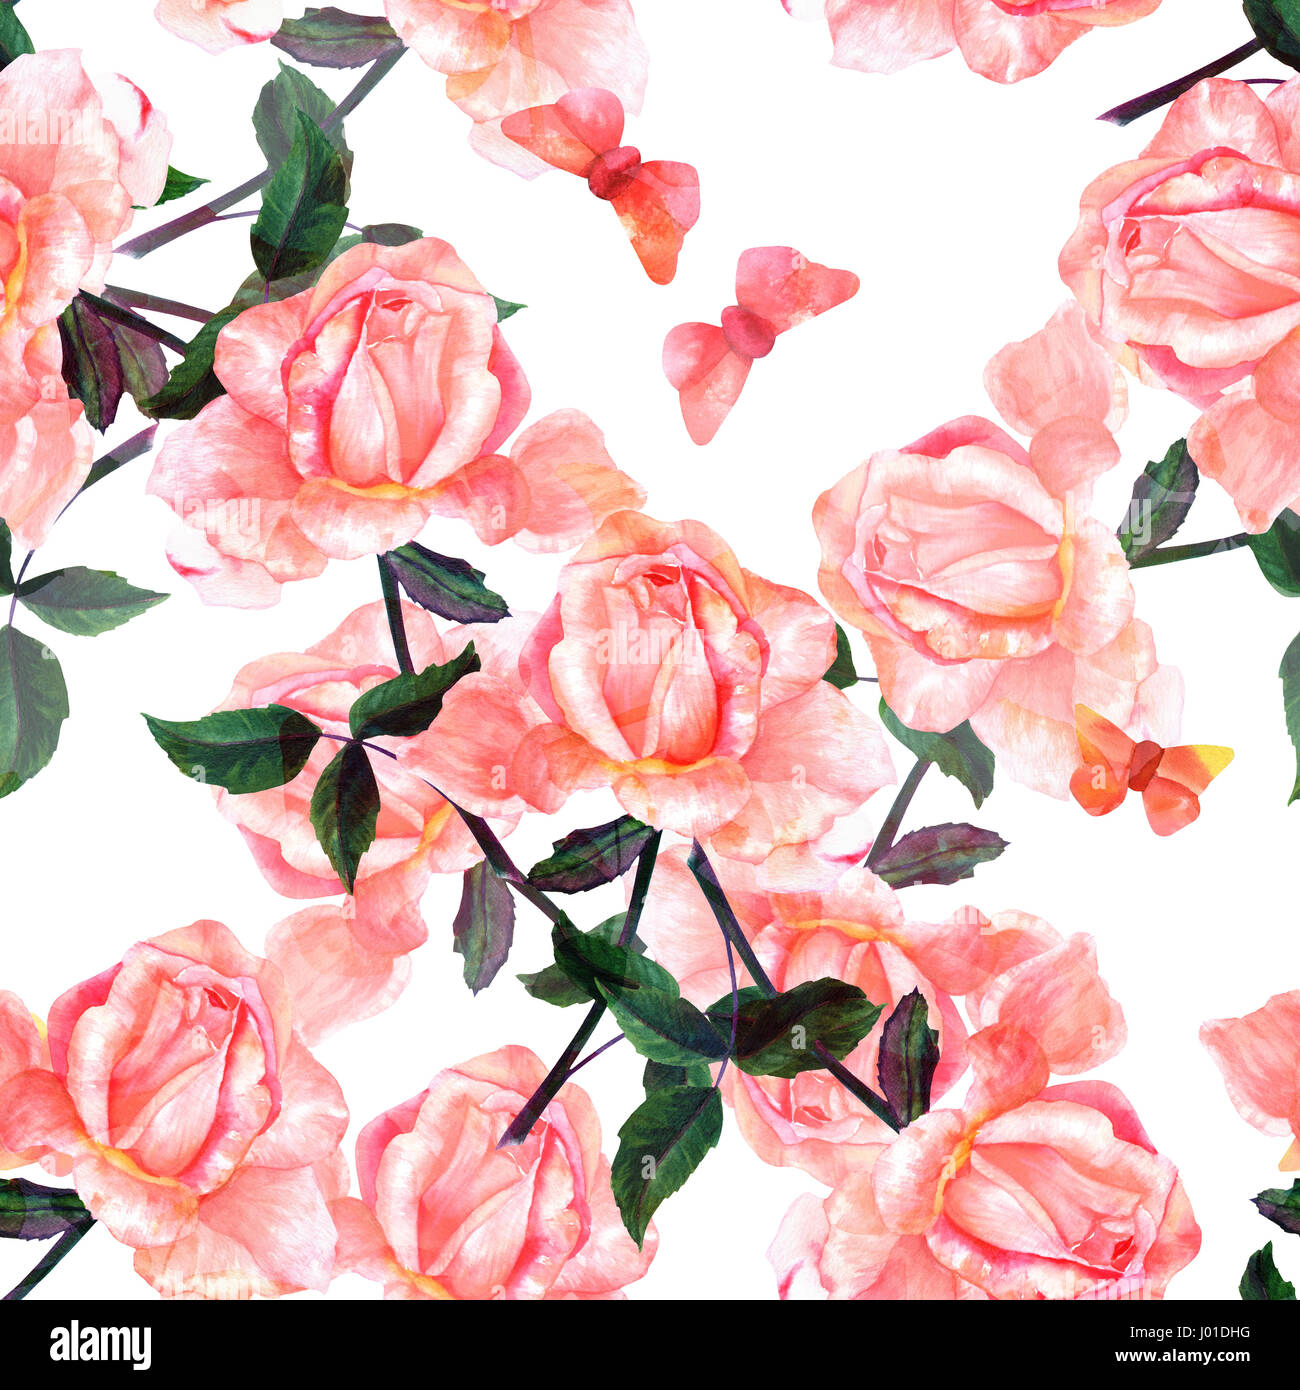 A Seamless Pattern With A Watercolor Drawing Of A Blooming Pink Rose Stock Photo Alamy Log in sign up watercolor pink roses. https www alamy com stock photo a seamless pattern with a watercolor drawing of a blooming pink rose 137715580 html